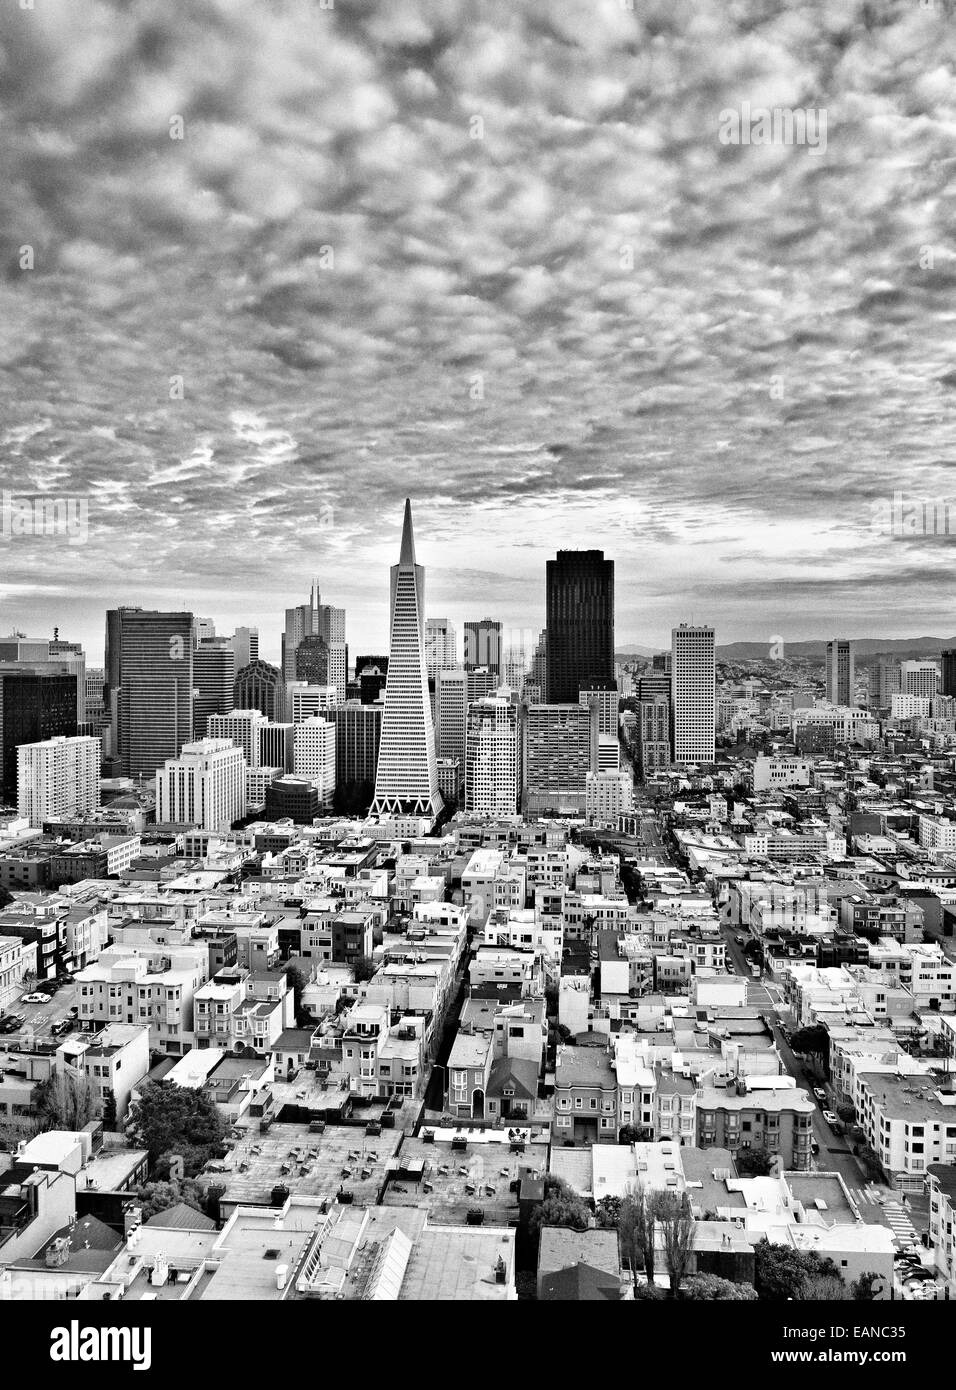 Black and white image of San Francisco under a low, ominous, cloudy sky Stock Photo